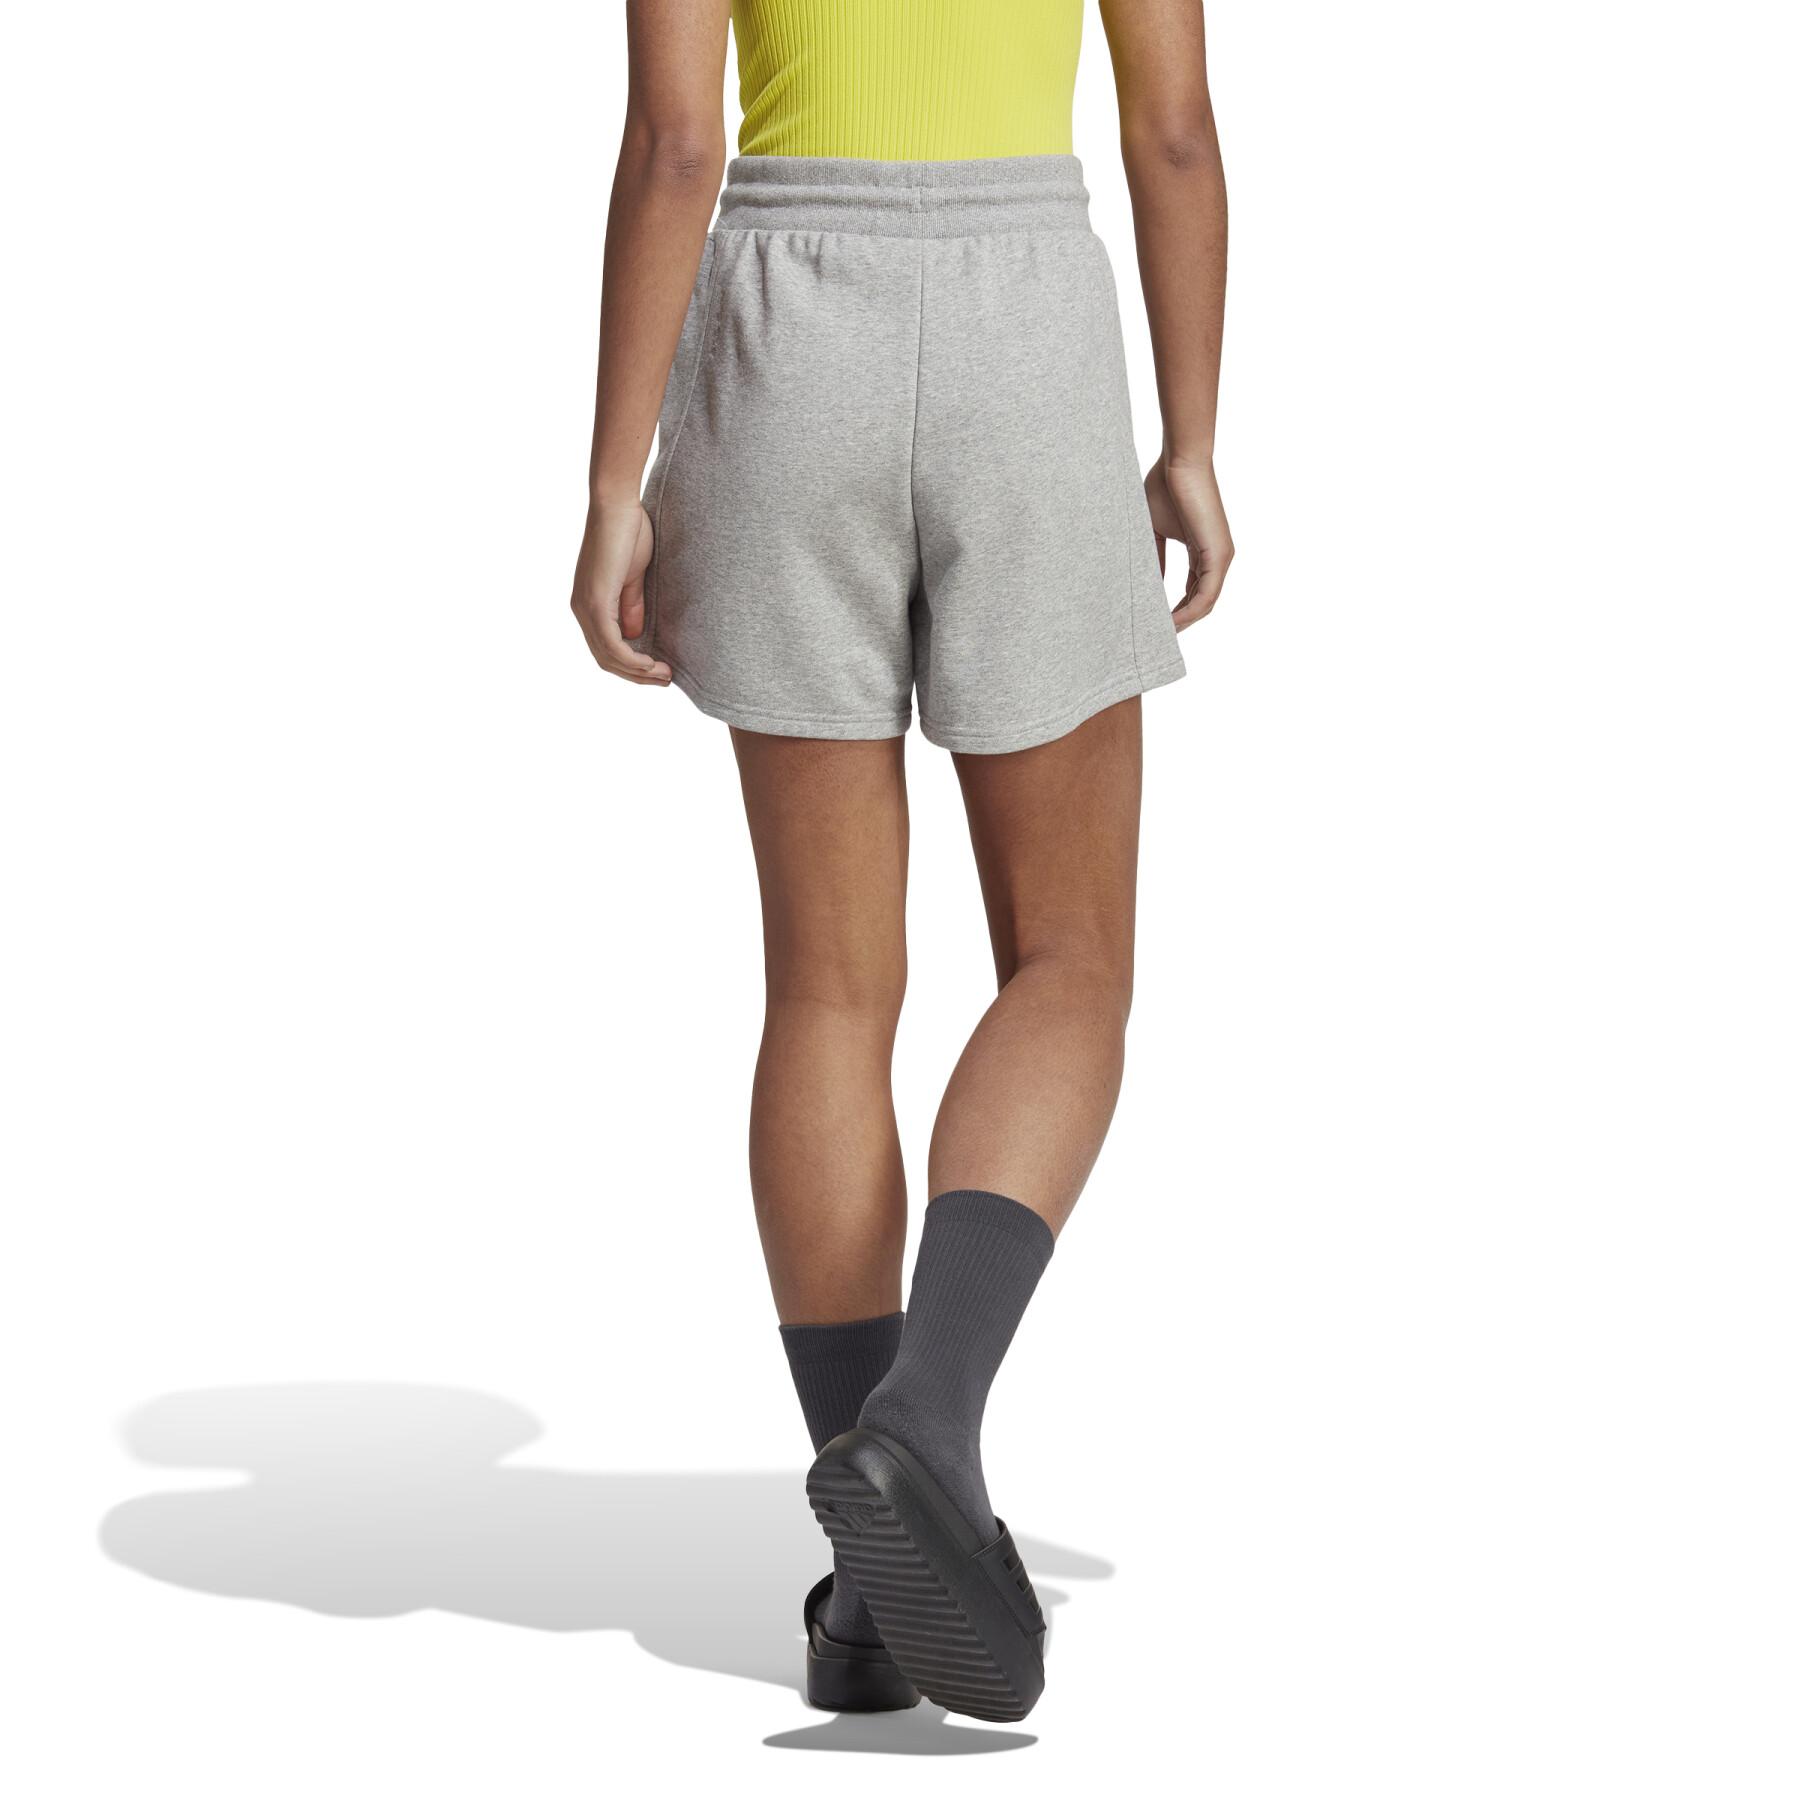 Women's shorts adidas All SZN French Terry